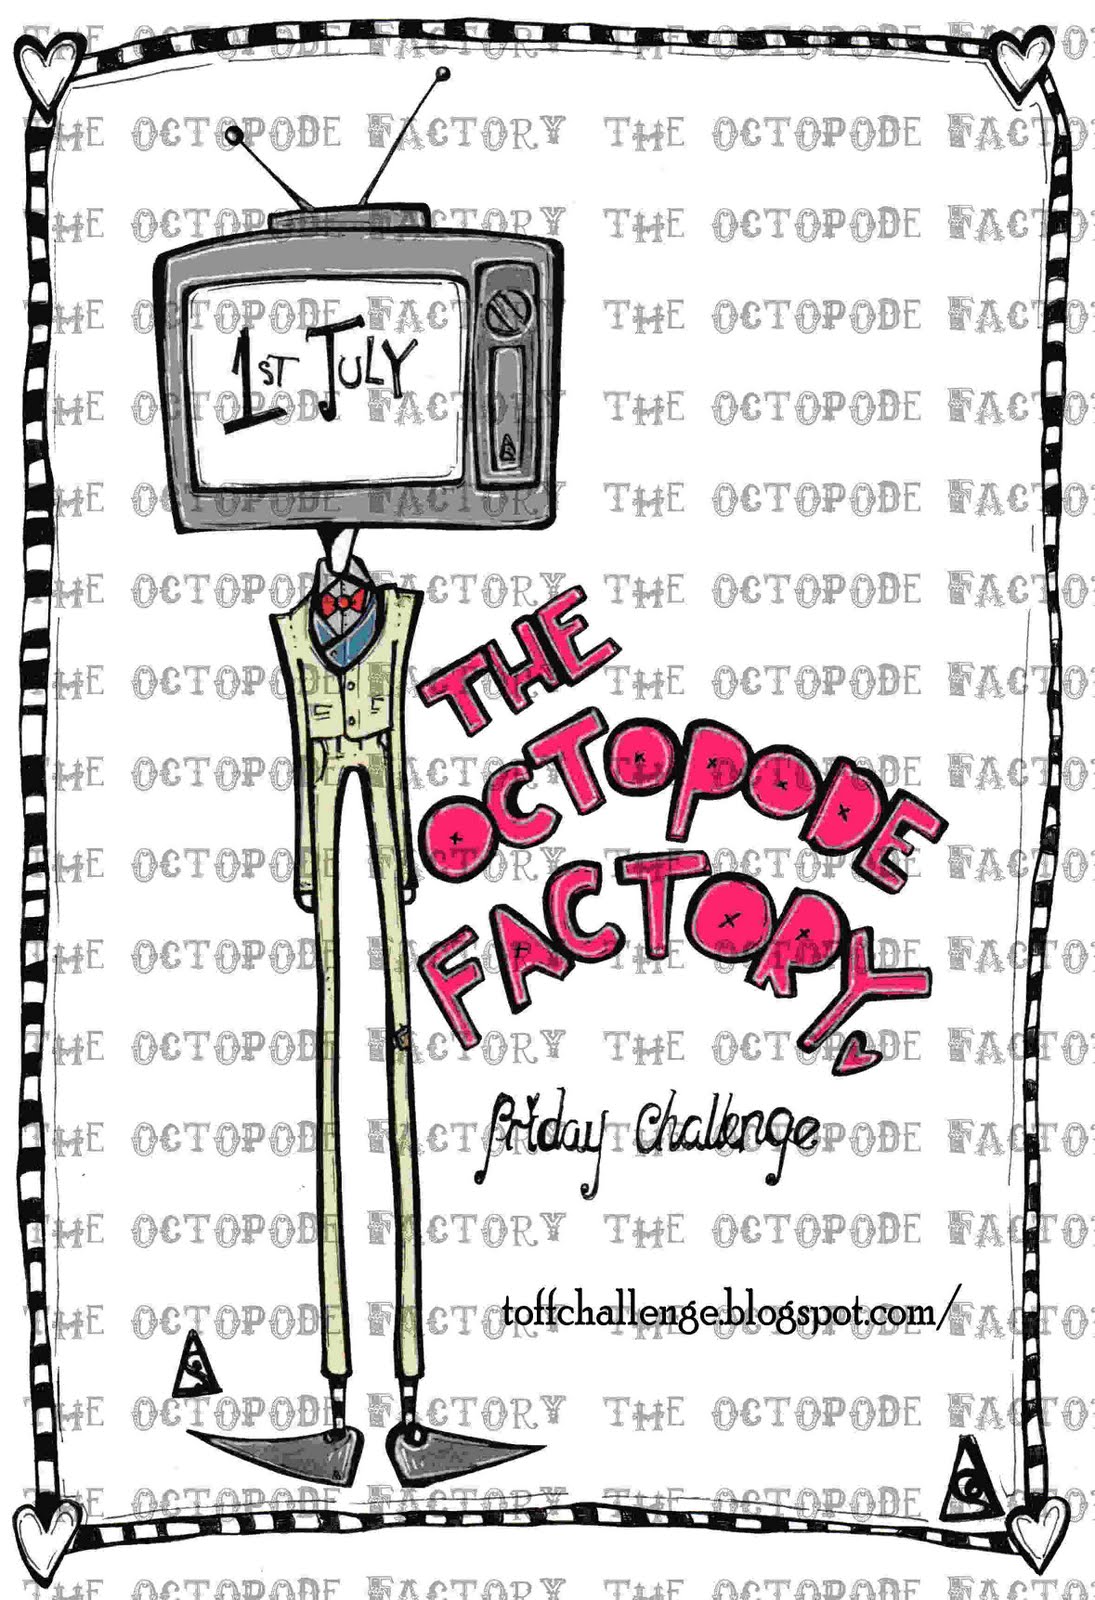 The Octopode Factory Friday Challenge